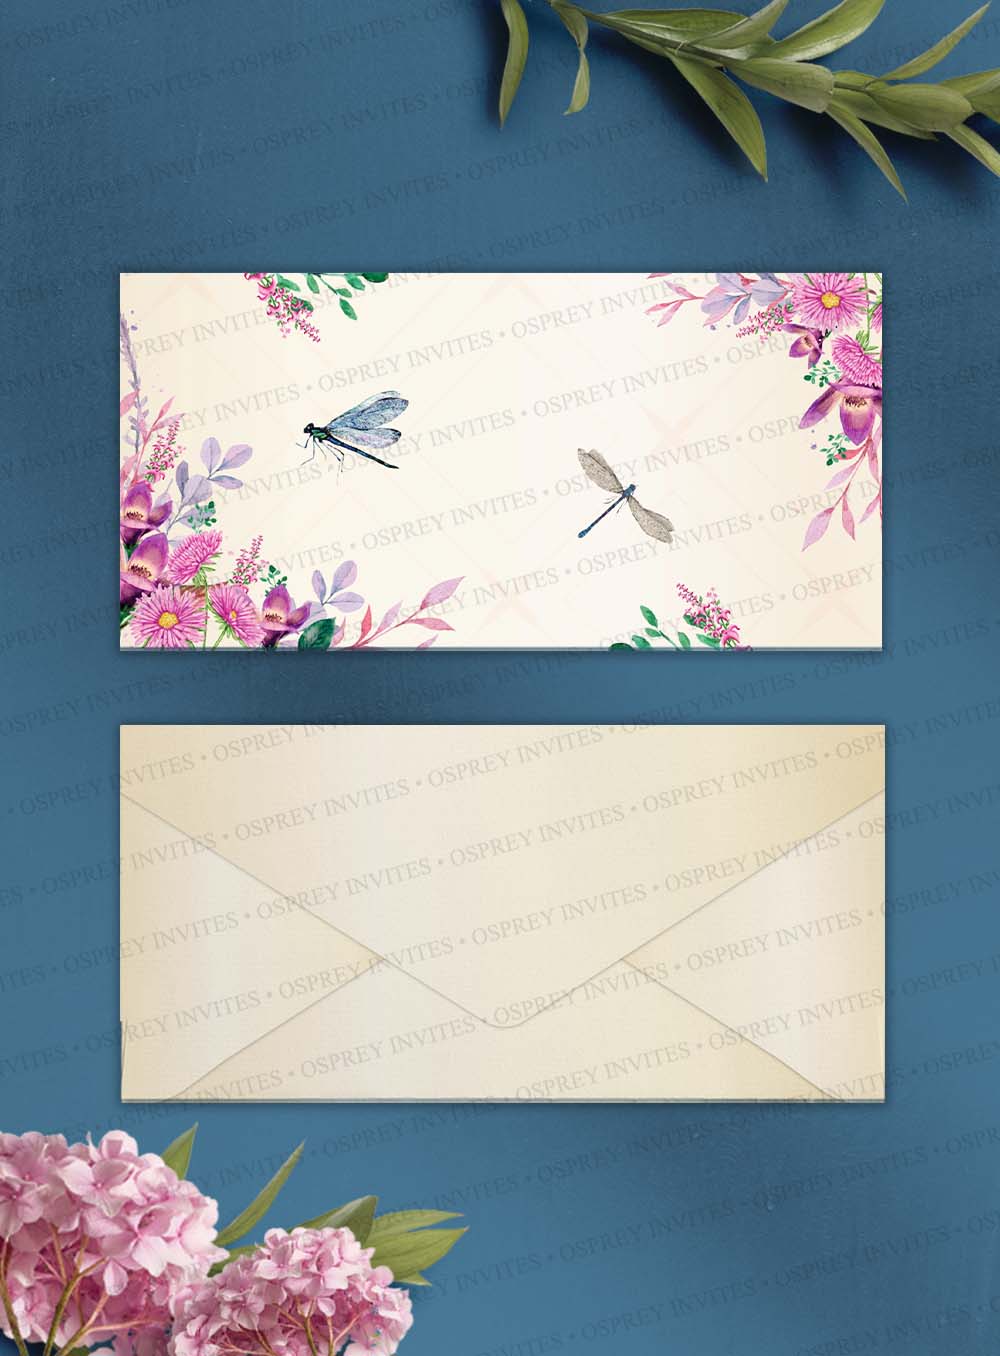 Money envelope design that includes two hand-illustrated dragonfly design with a beautiful pink floral design that can pink florals, a must-have wedding stationery item for Indian traditional weddings.